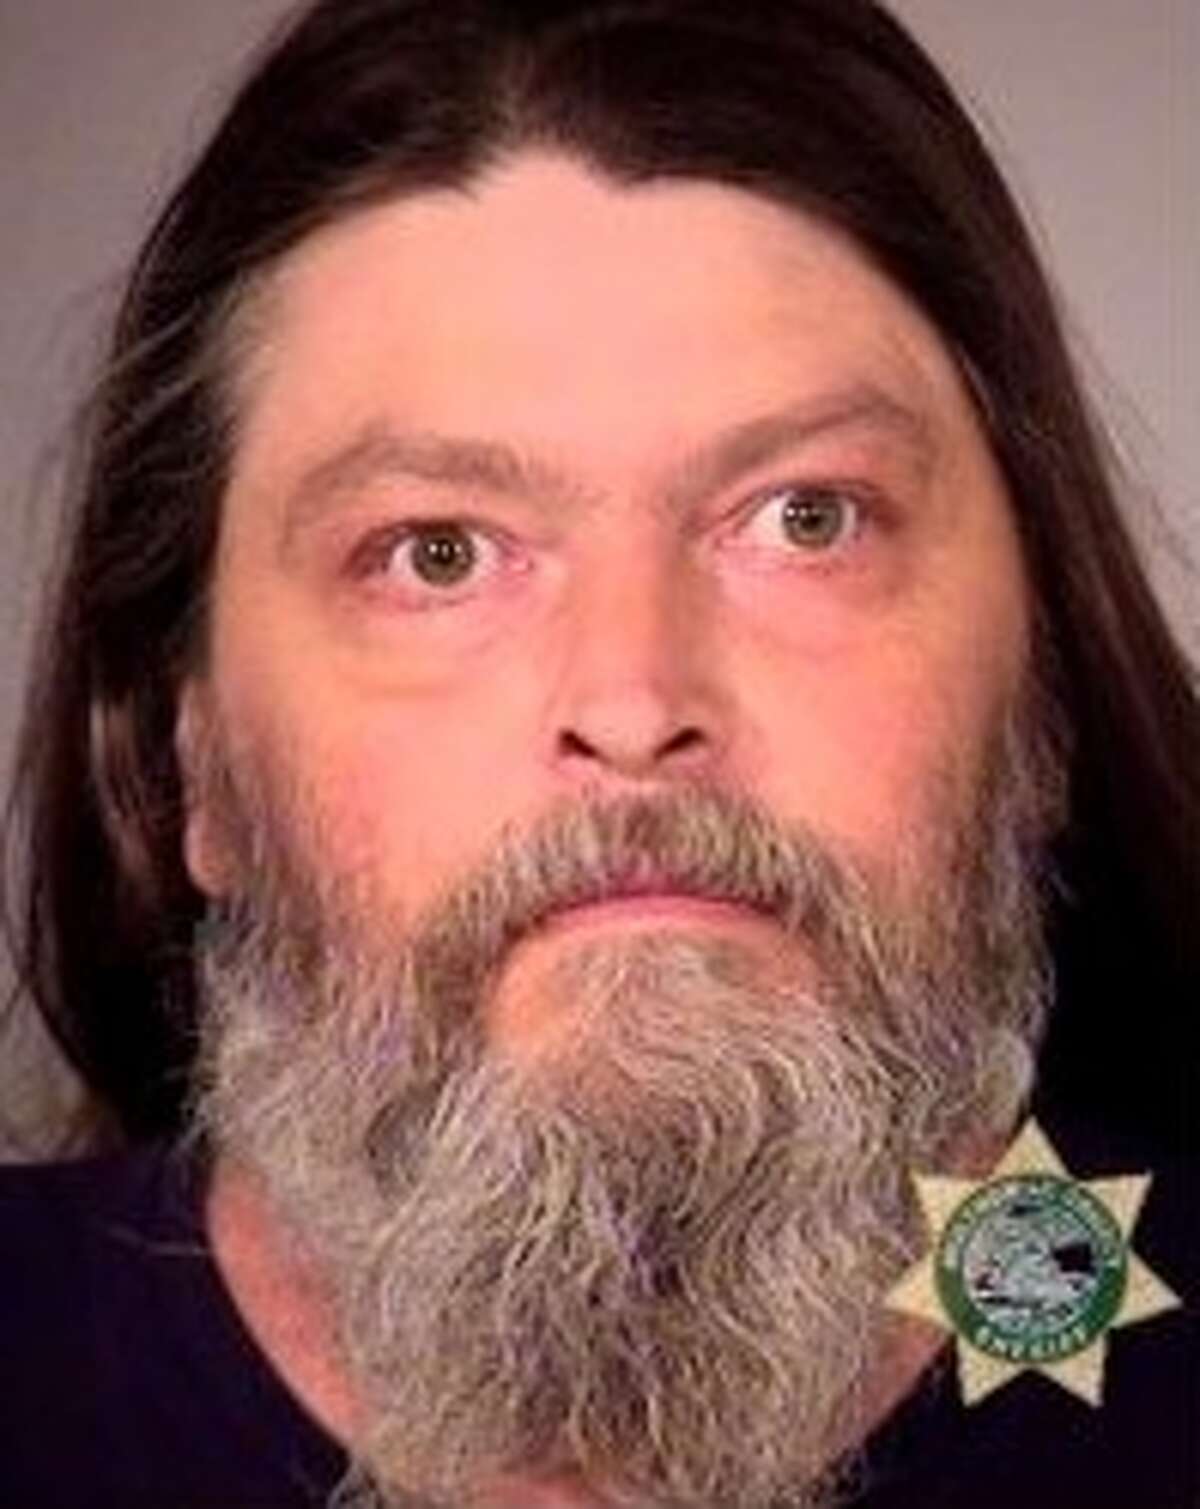 Earl Deverle Fisher is being held without bail in Multnomah County Jail on a murder charge  for allegedly being involved in the death of Robert Huggins on July 1, 2015.